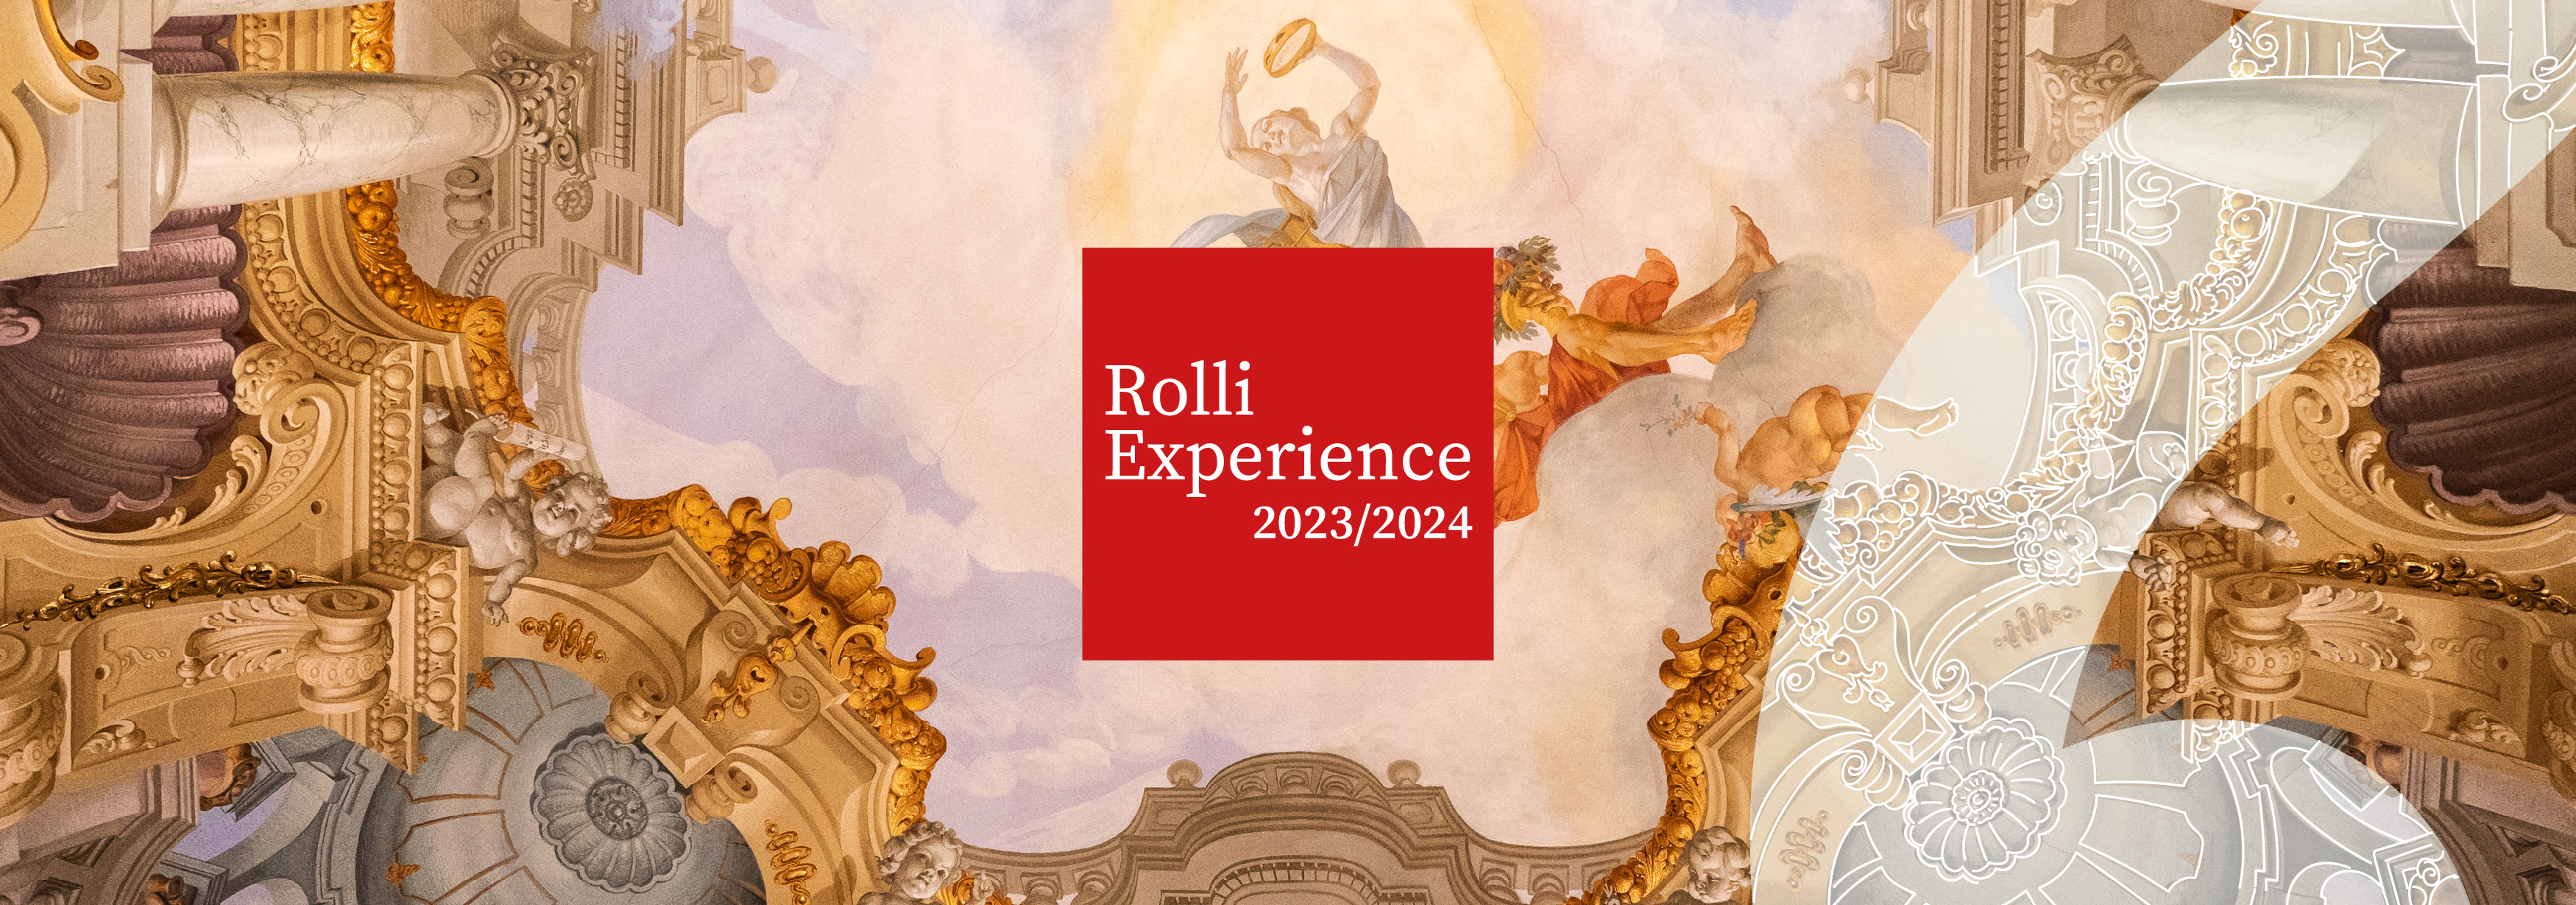 Rolli Experience 